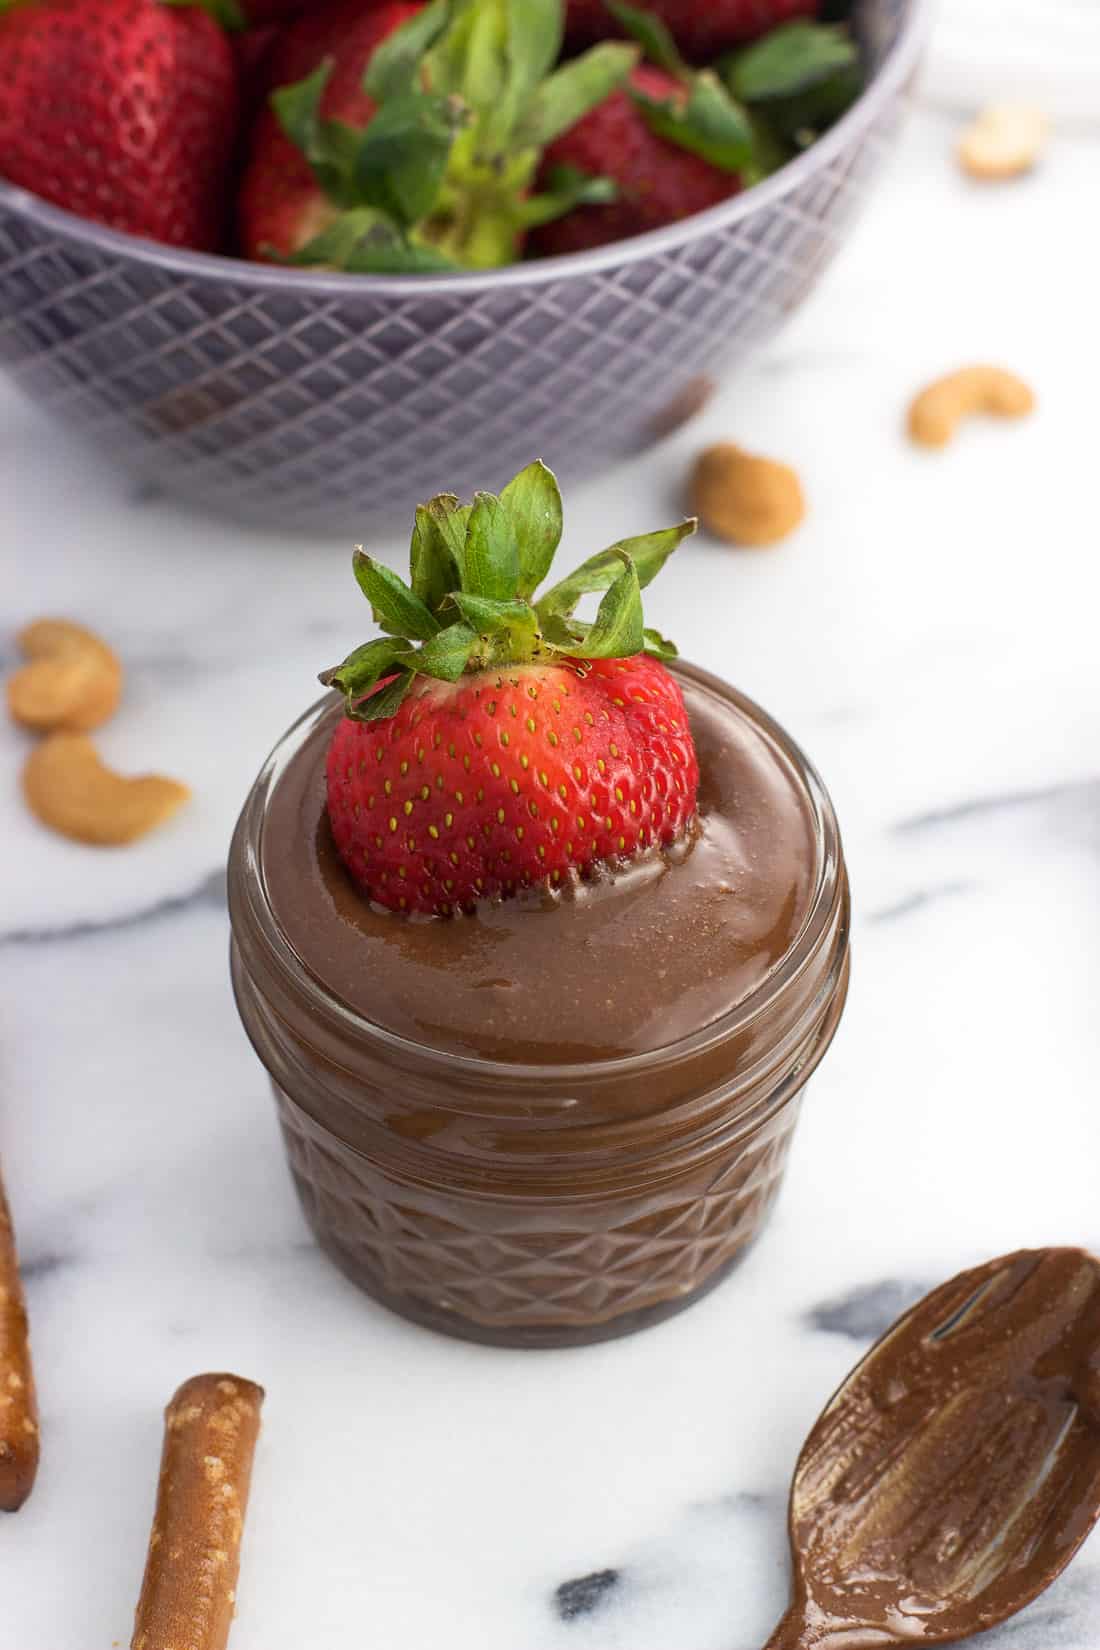 A strawberry half dunked into a jar of chocolate cashew butter